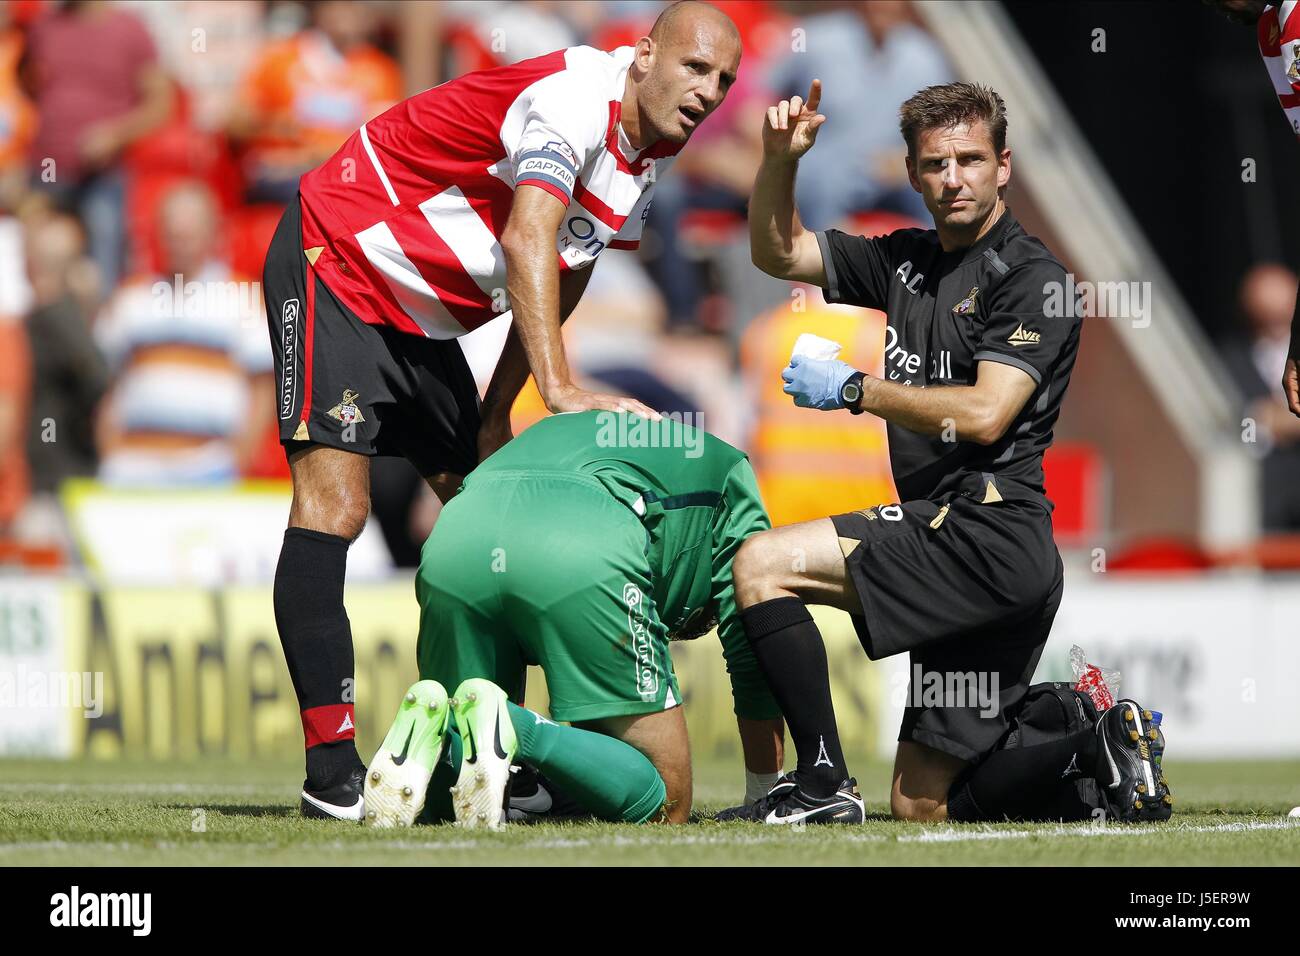 ROSS TURNBULL braucht medizinische an der DONCASTER ROVERS V BLACKPOOL KEEPMOAT Stadion DONCASTER ENGLAND 3. August 2013 Stockfoto